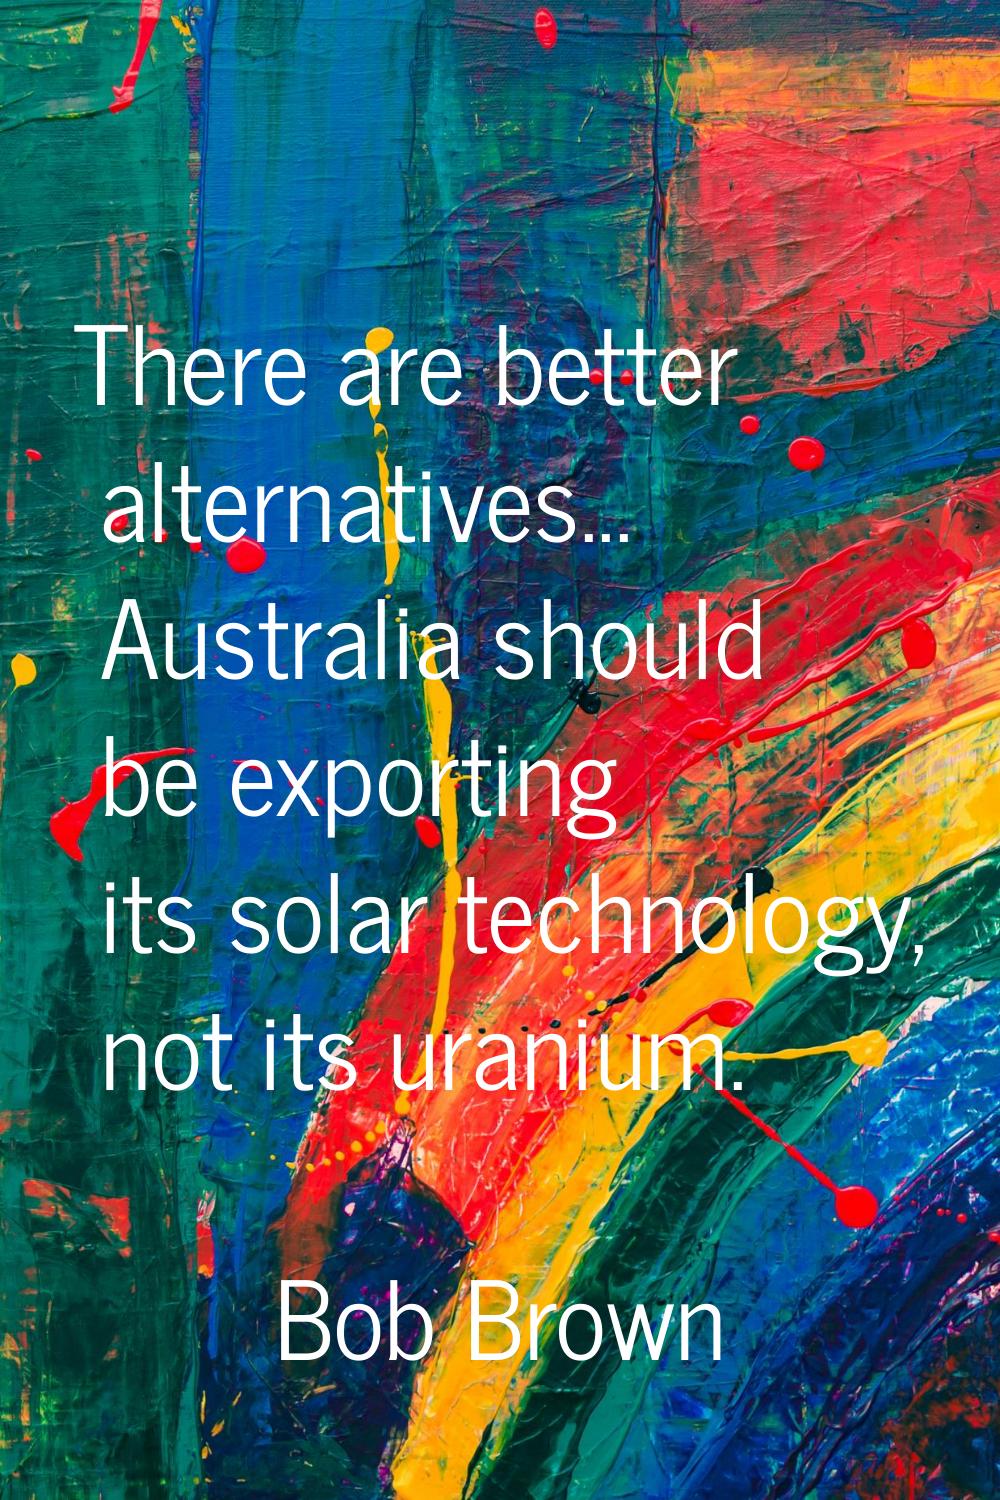 There are better alternatives... Australia should be exporting its solar technology, not its uraniu